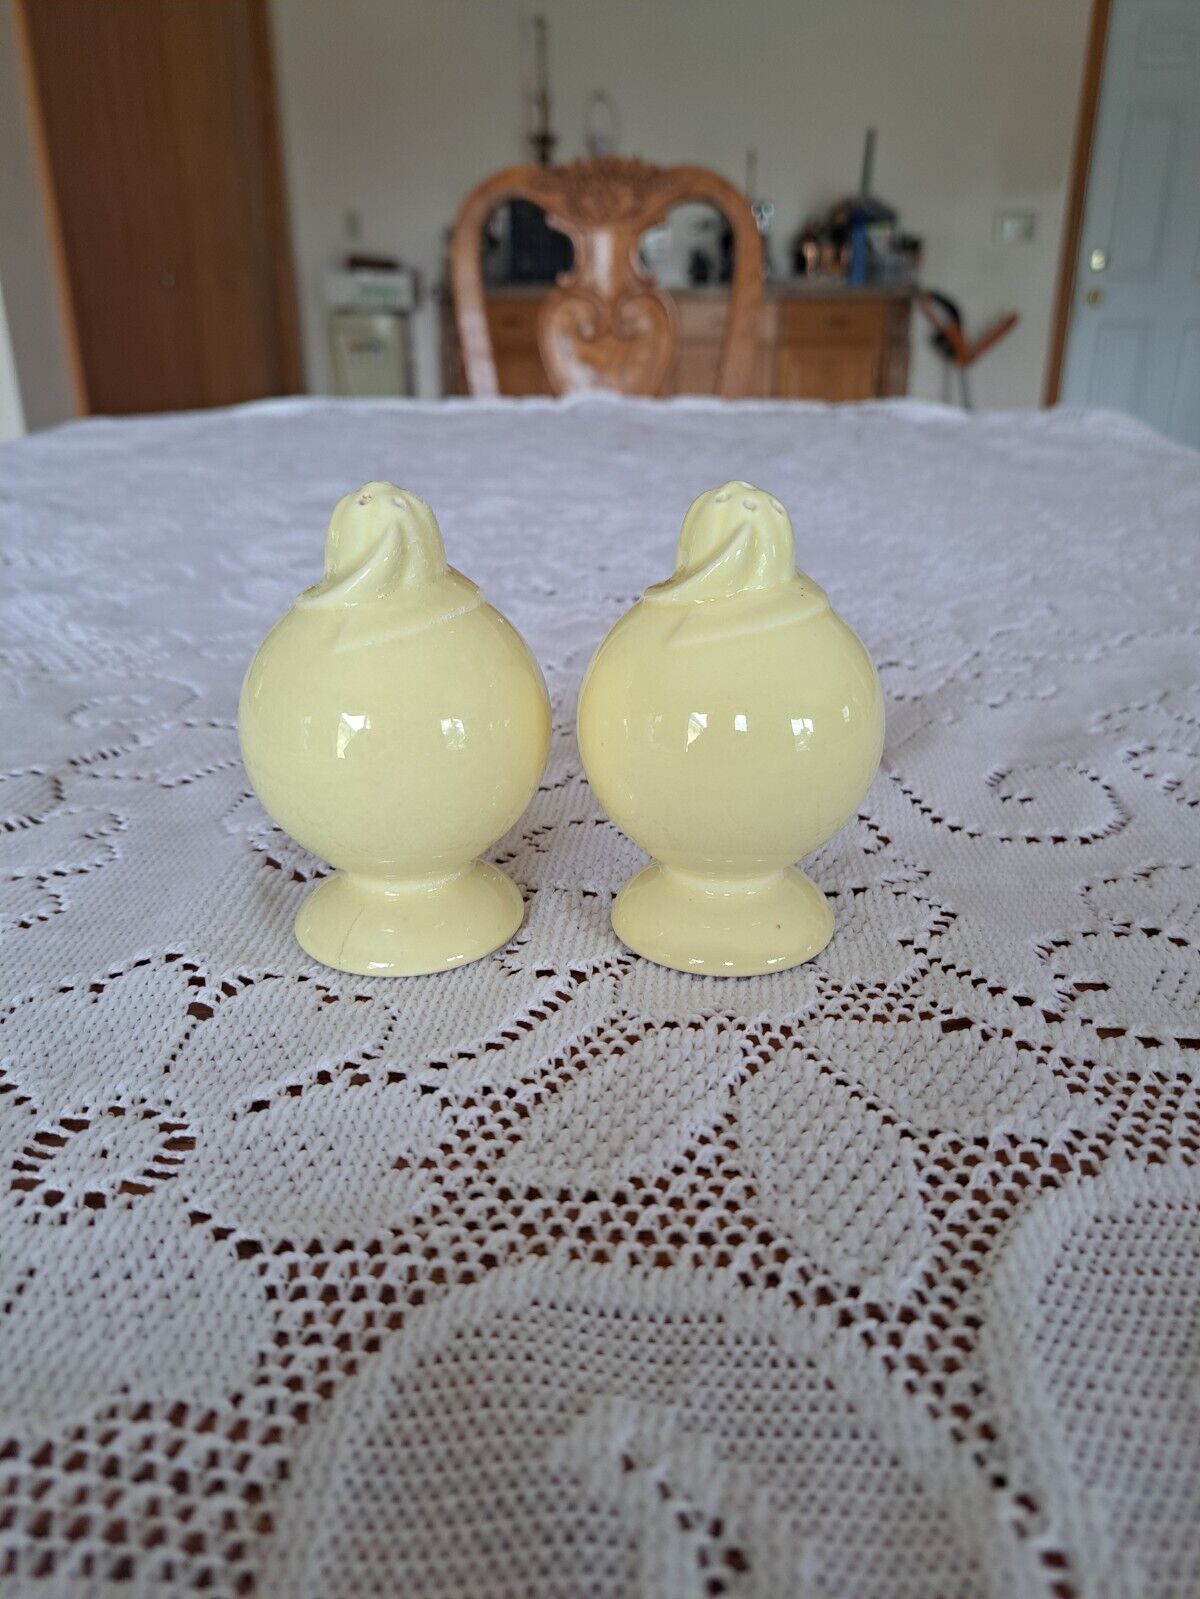 Taylor Smith Taylor USA Luray Pastels Salt Pepper Shaker Set Your Choice